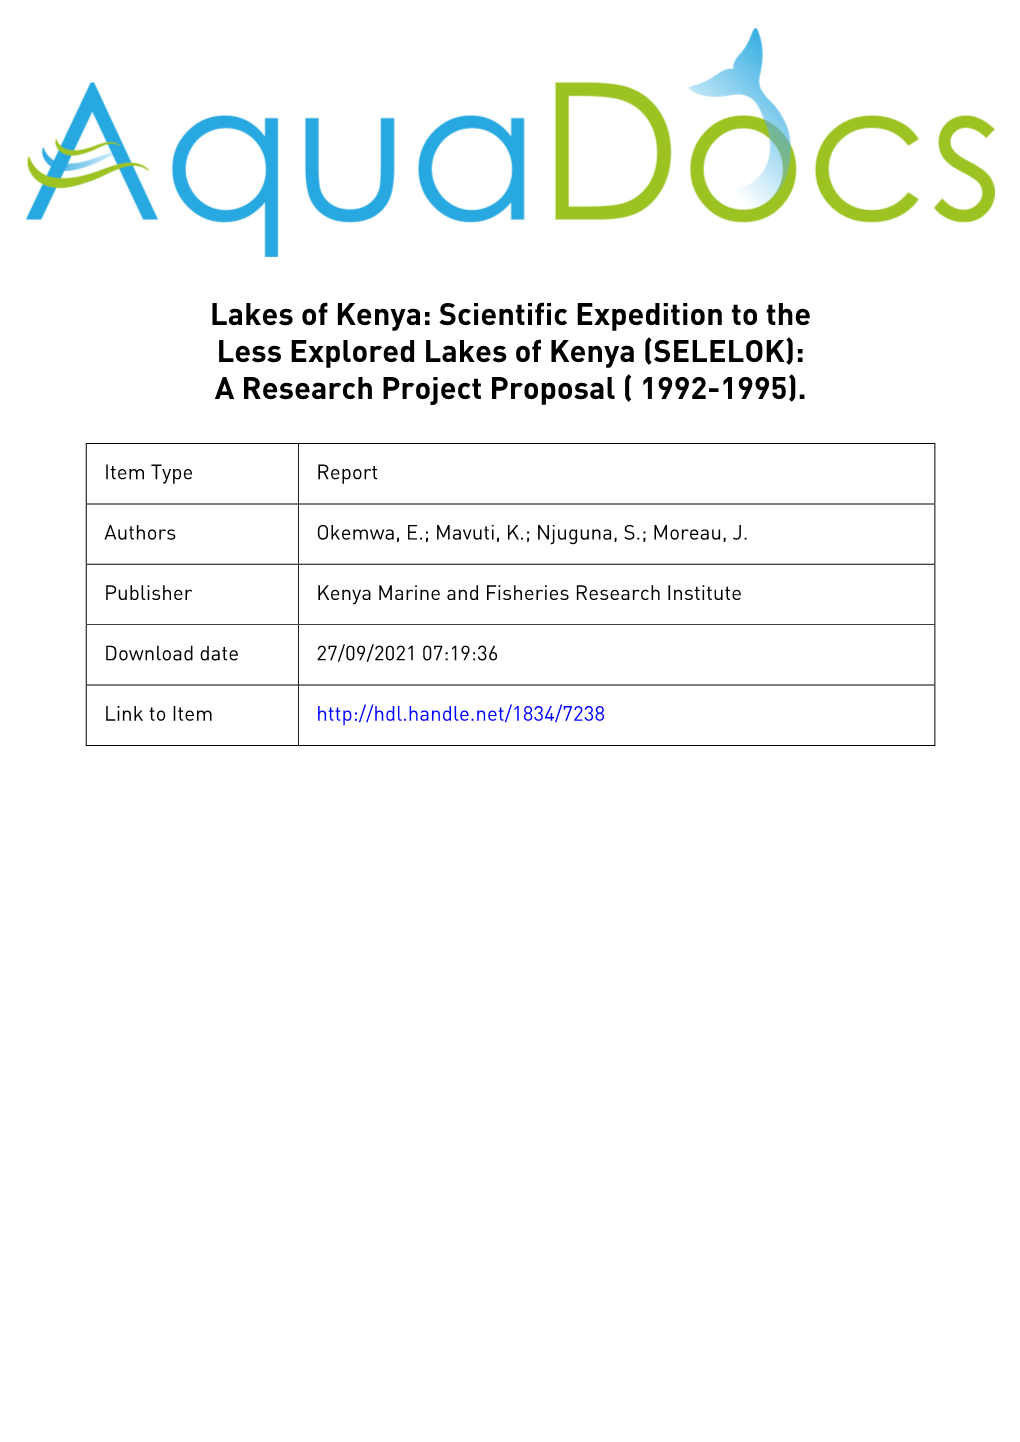 Scientific Expedition to Ithe Less Explored Lakes Ofkenya (SELELOK)